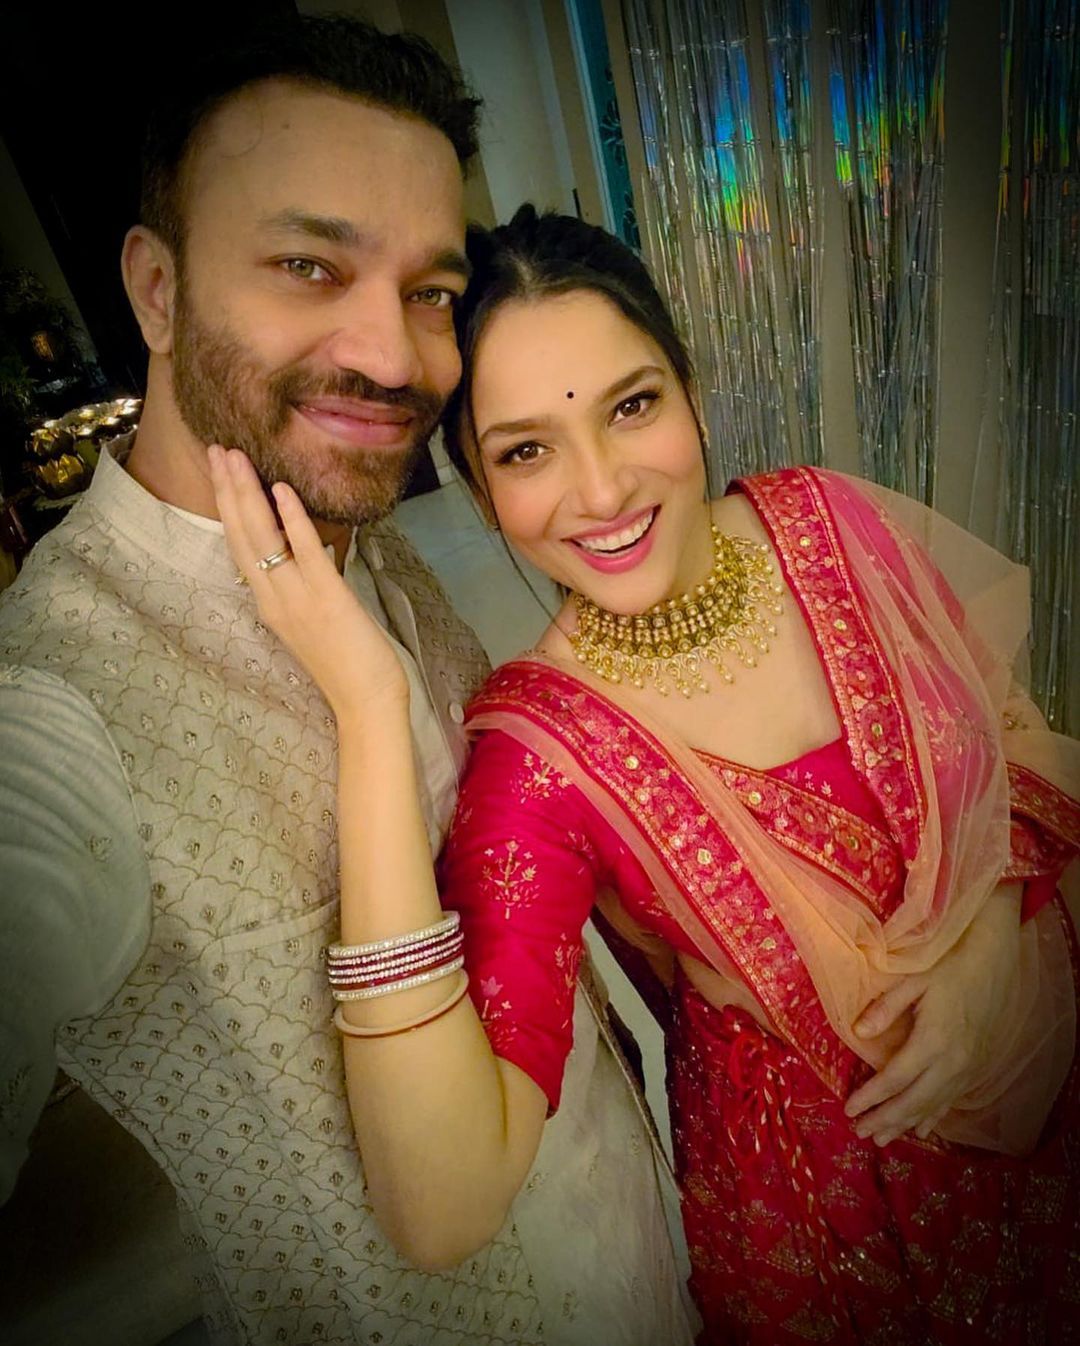 Ankita Lokhande Gets Trolled For Diwali Post With Boyfriend Vicky Jain, Asked: ‘Justice For Sushant Singh Rajput?’